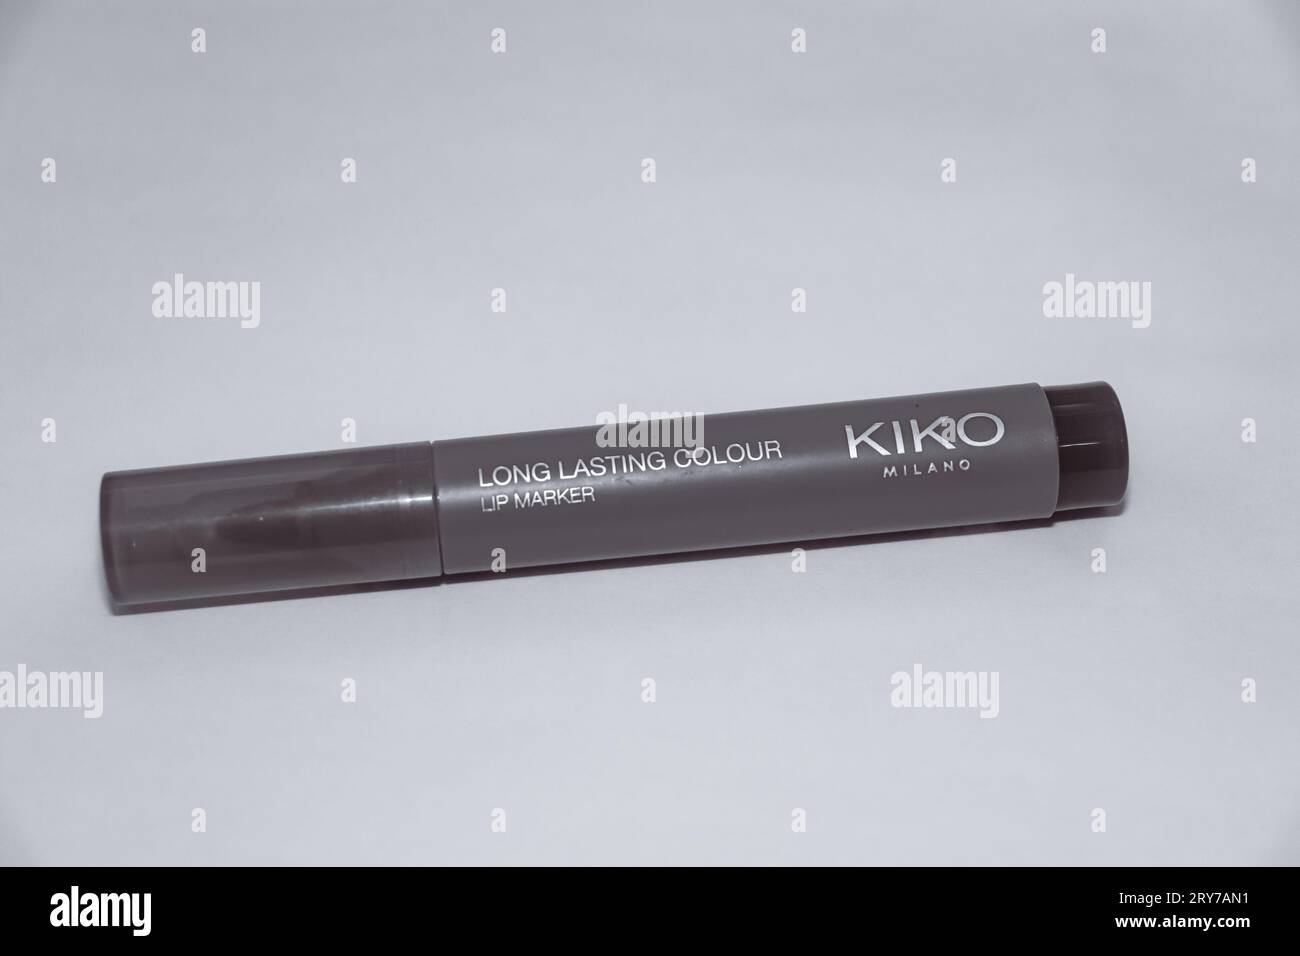 Black and white Long Lasting Colour Lip Marker by Kiko Milano, an Italian professional cosmetics brand isolated on white background Stock Photo